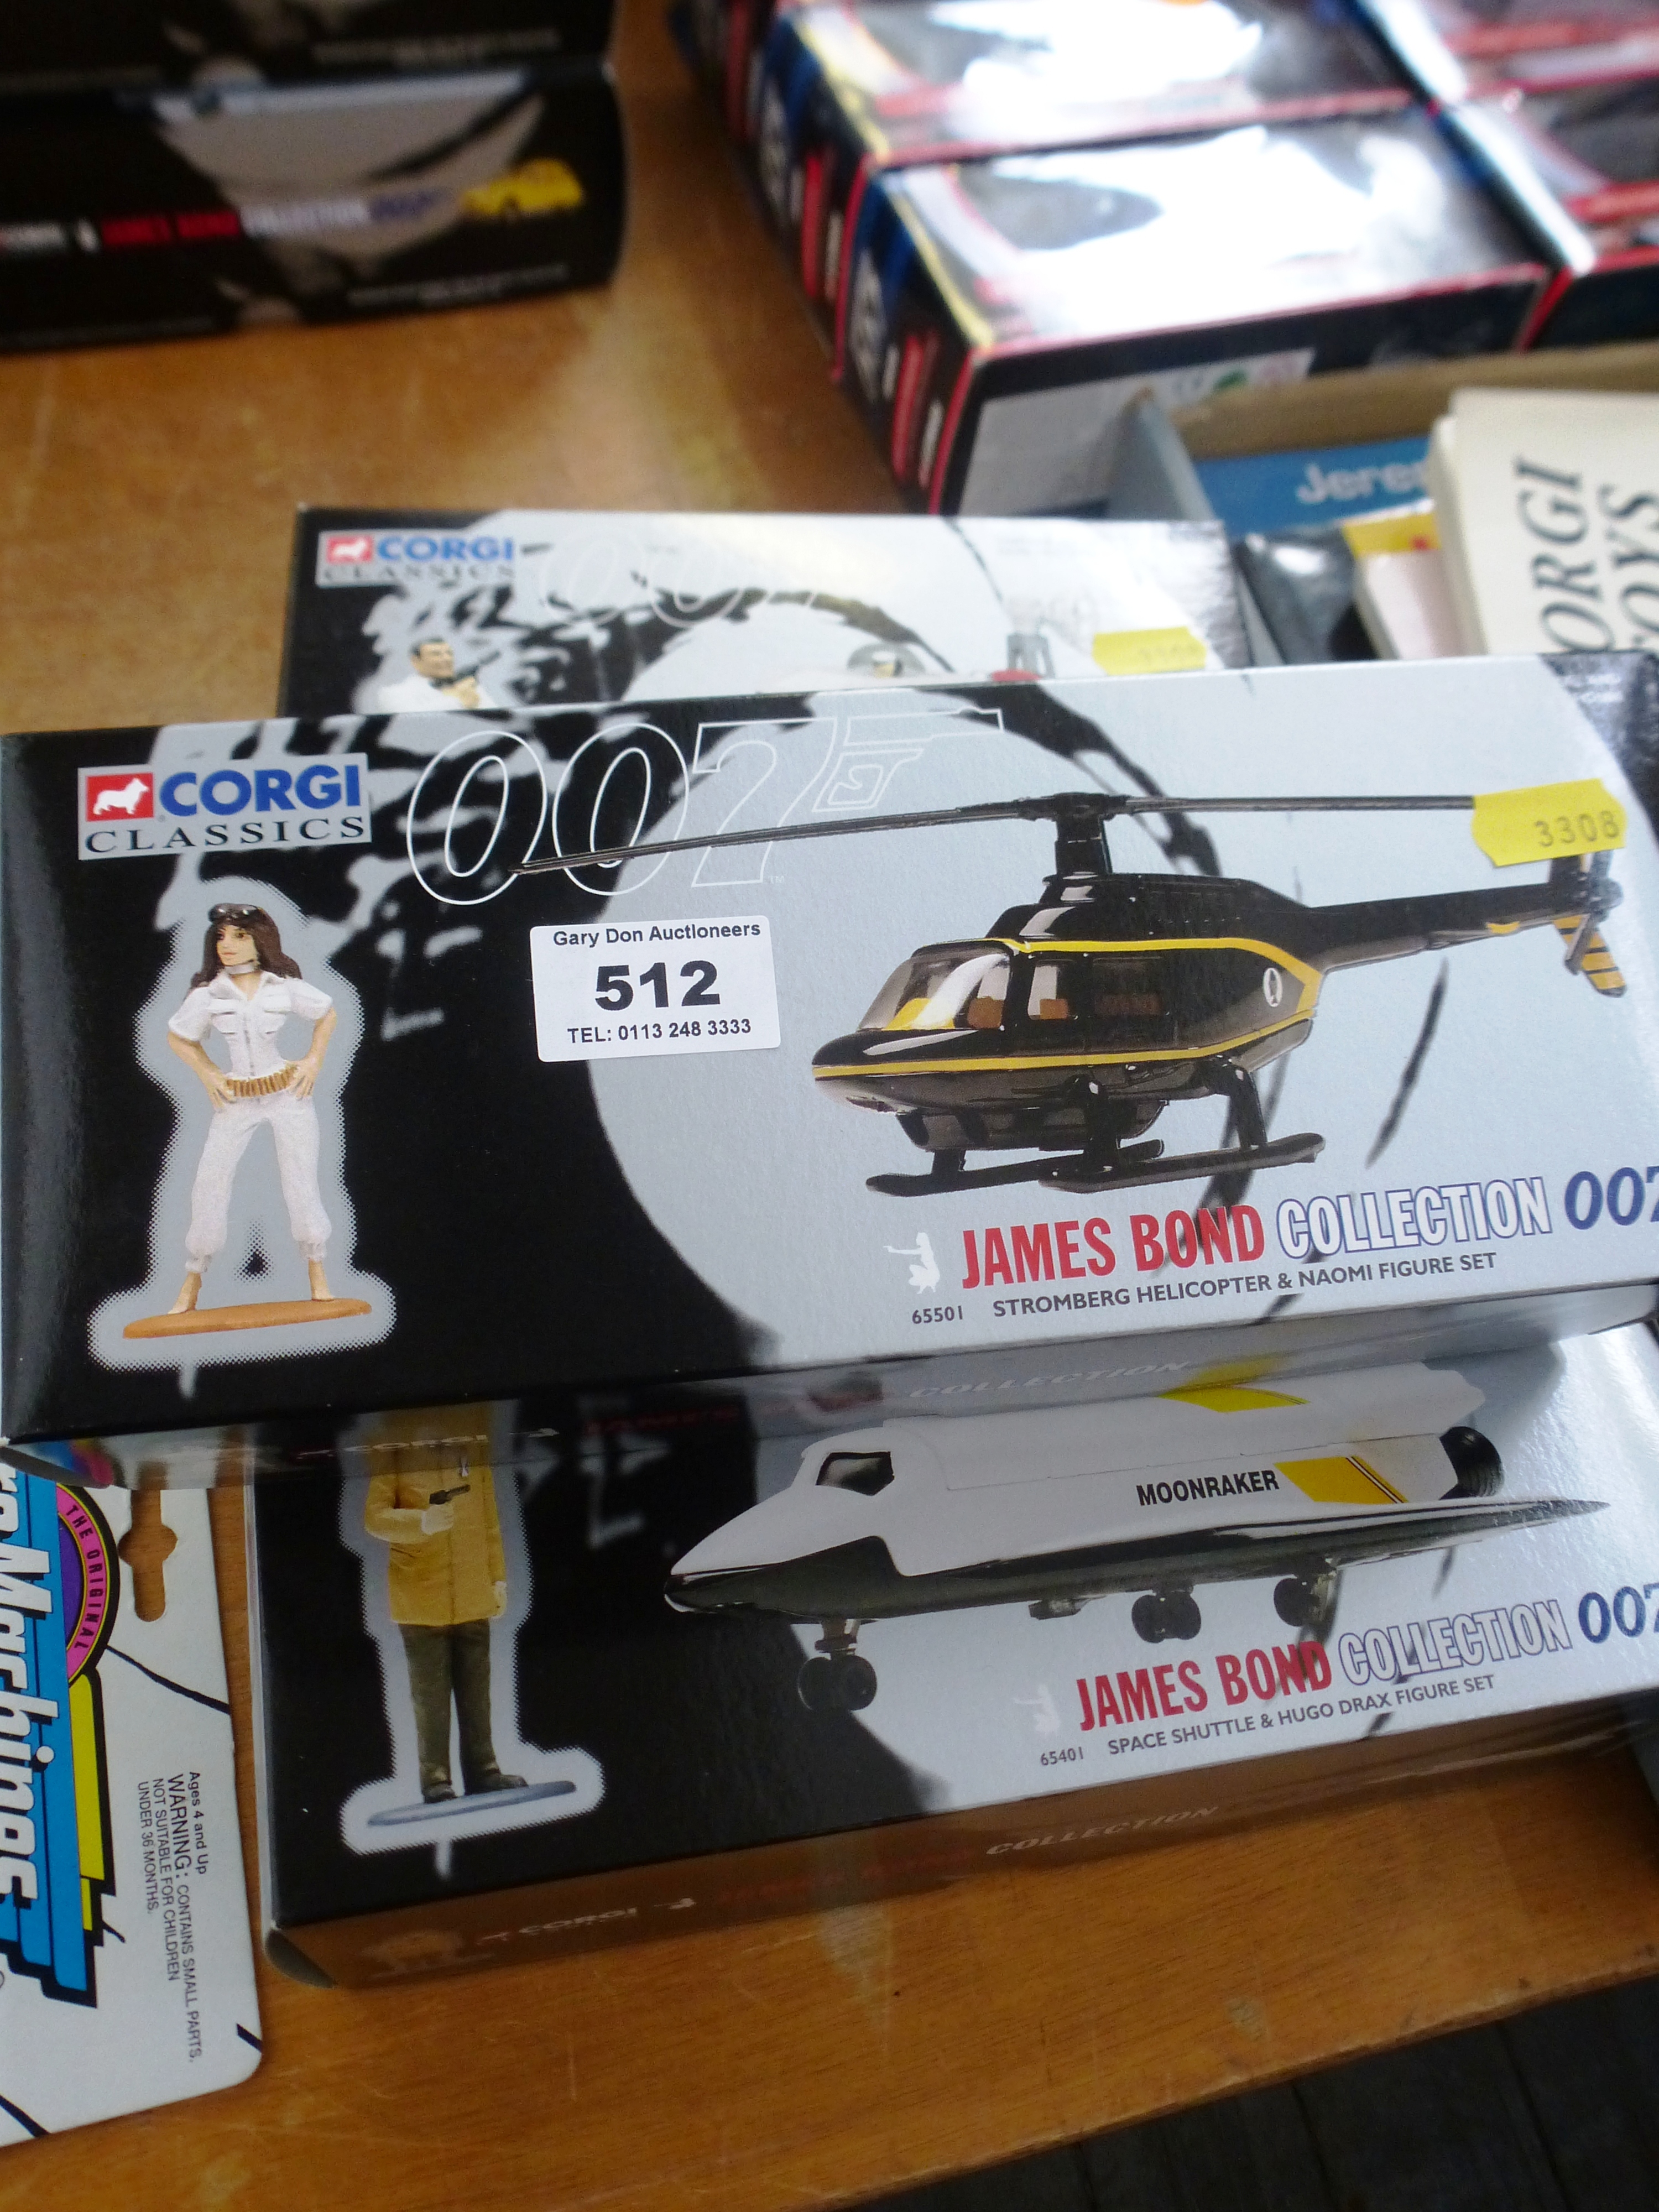 3 BOXED JAMES BOND COLLECTION SETS - 65201, 65501 AND 65401